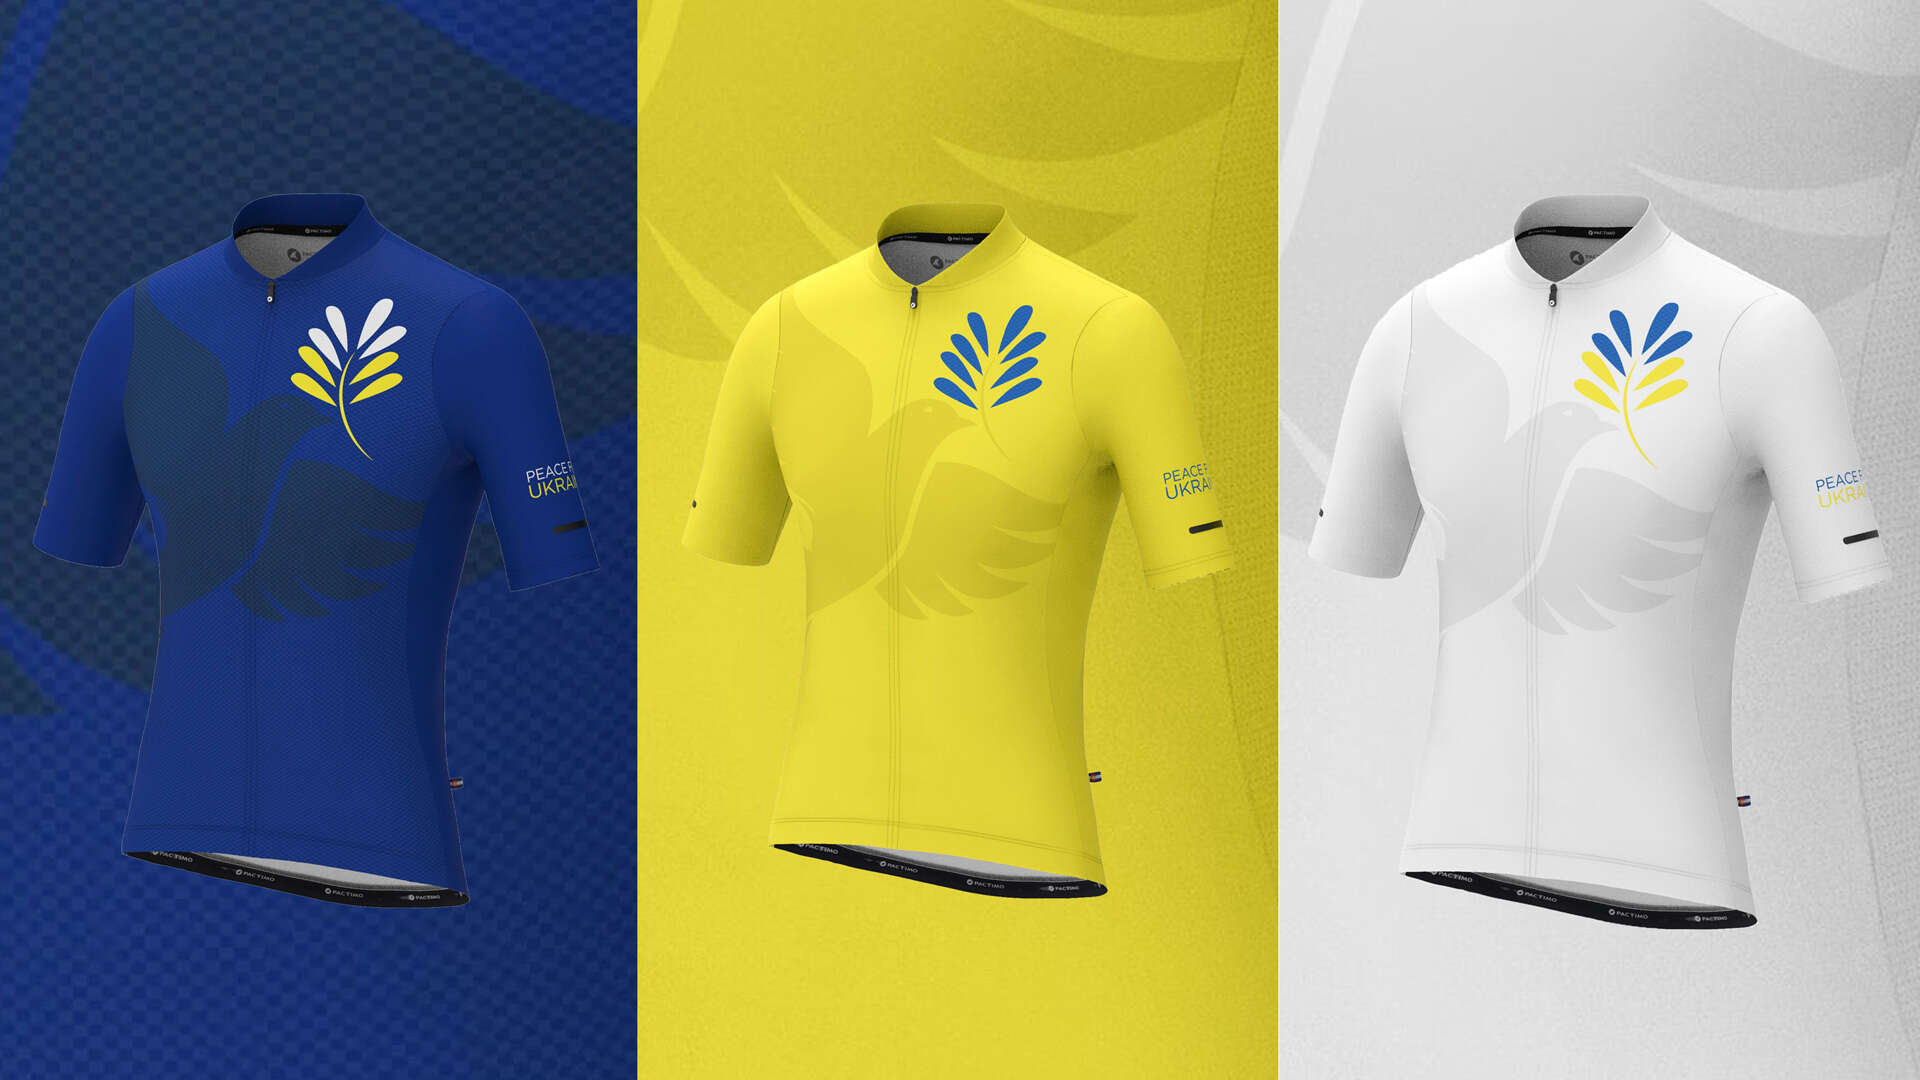 Indy freelance Peace for Ukraine Cycling Jerseys